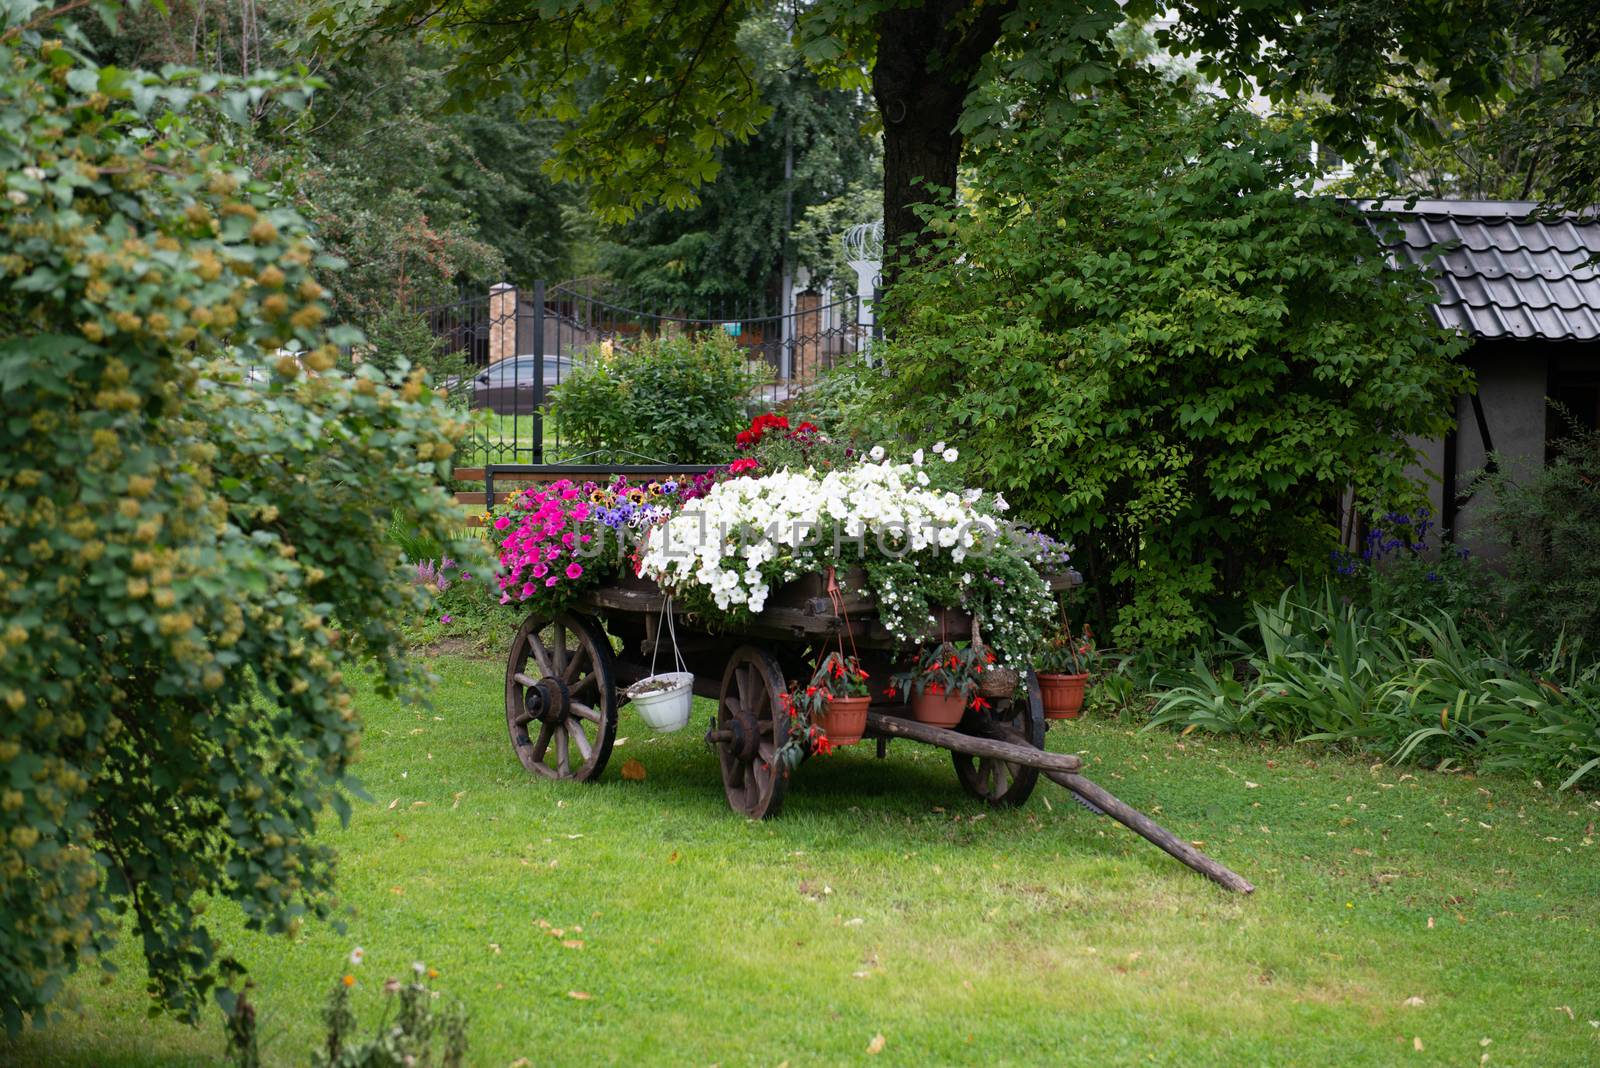 Flowers on the wagon on green grass by marynkin